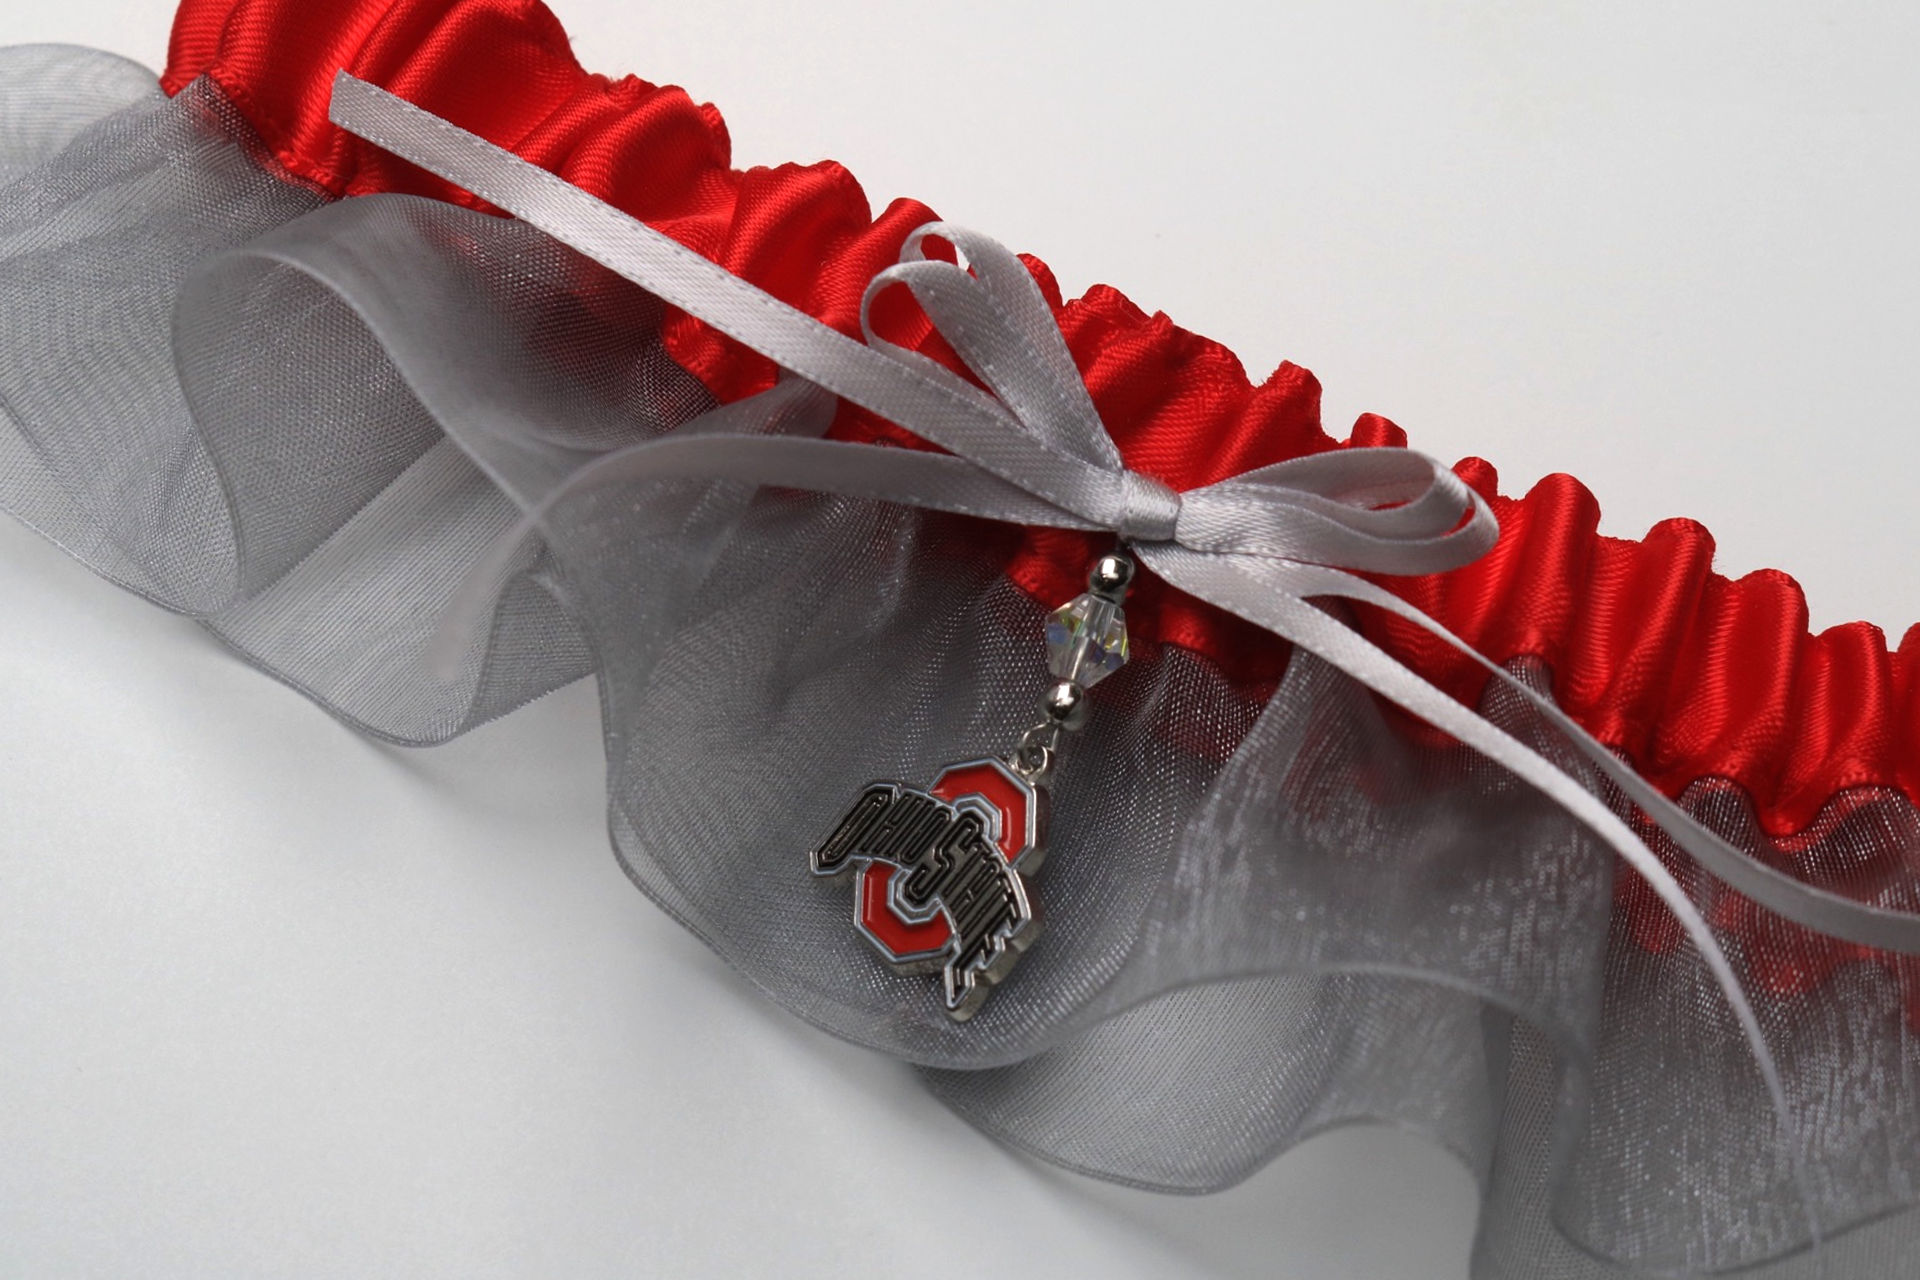 Ohio State University Inspired Garter with Licensed Collegiate Charm